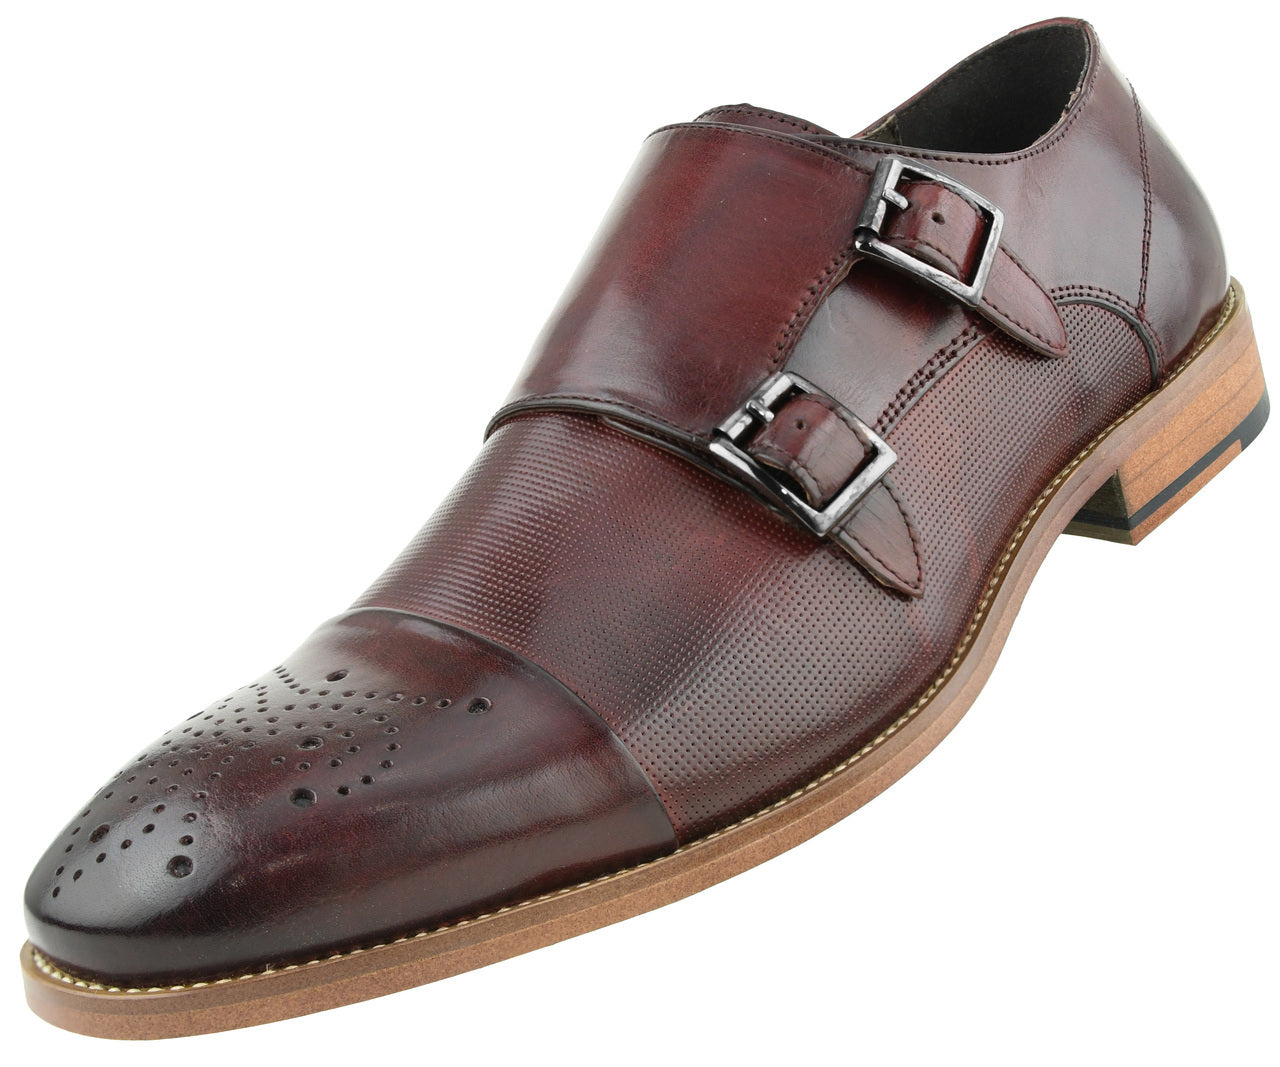 Asher Green Mens Burgundy Genuine Leather Cap Toe Double Monkstrap Dress Shoe with Perforated Design : Style AG1101-175